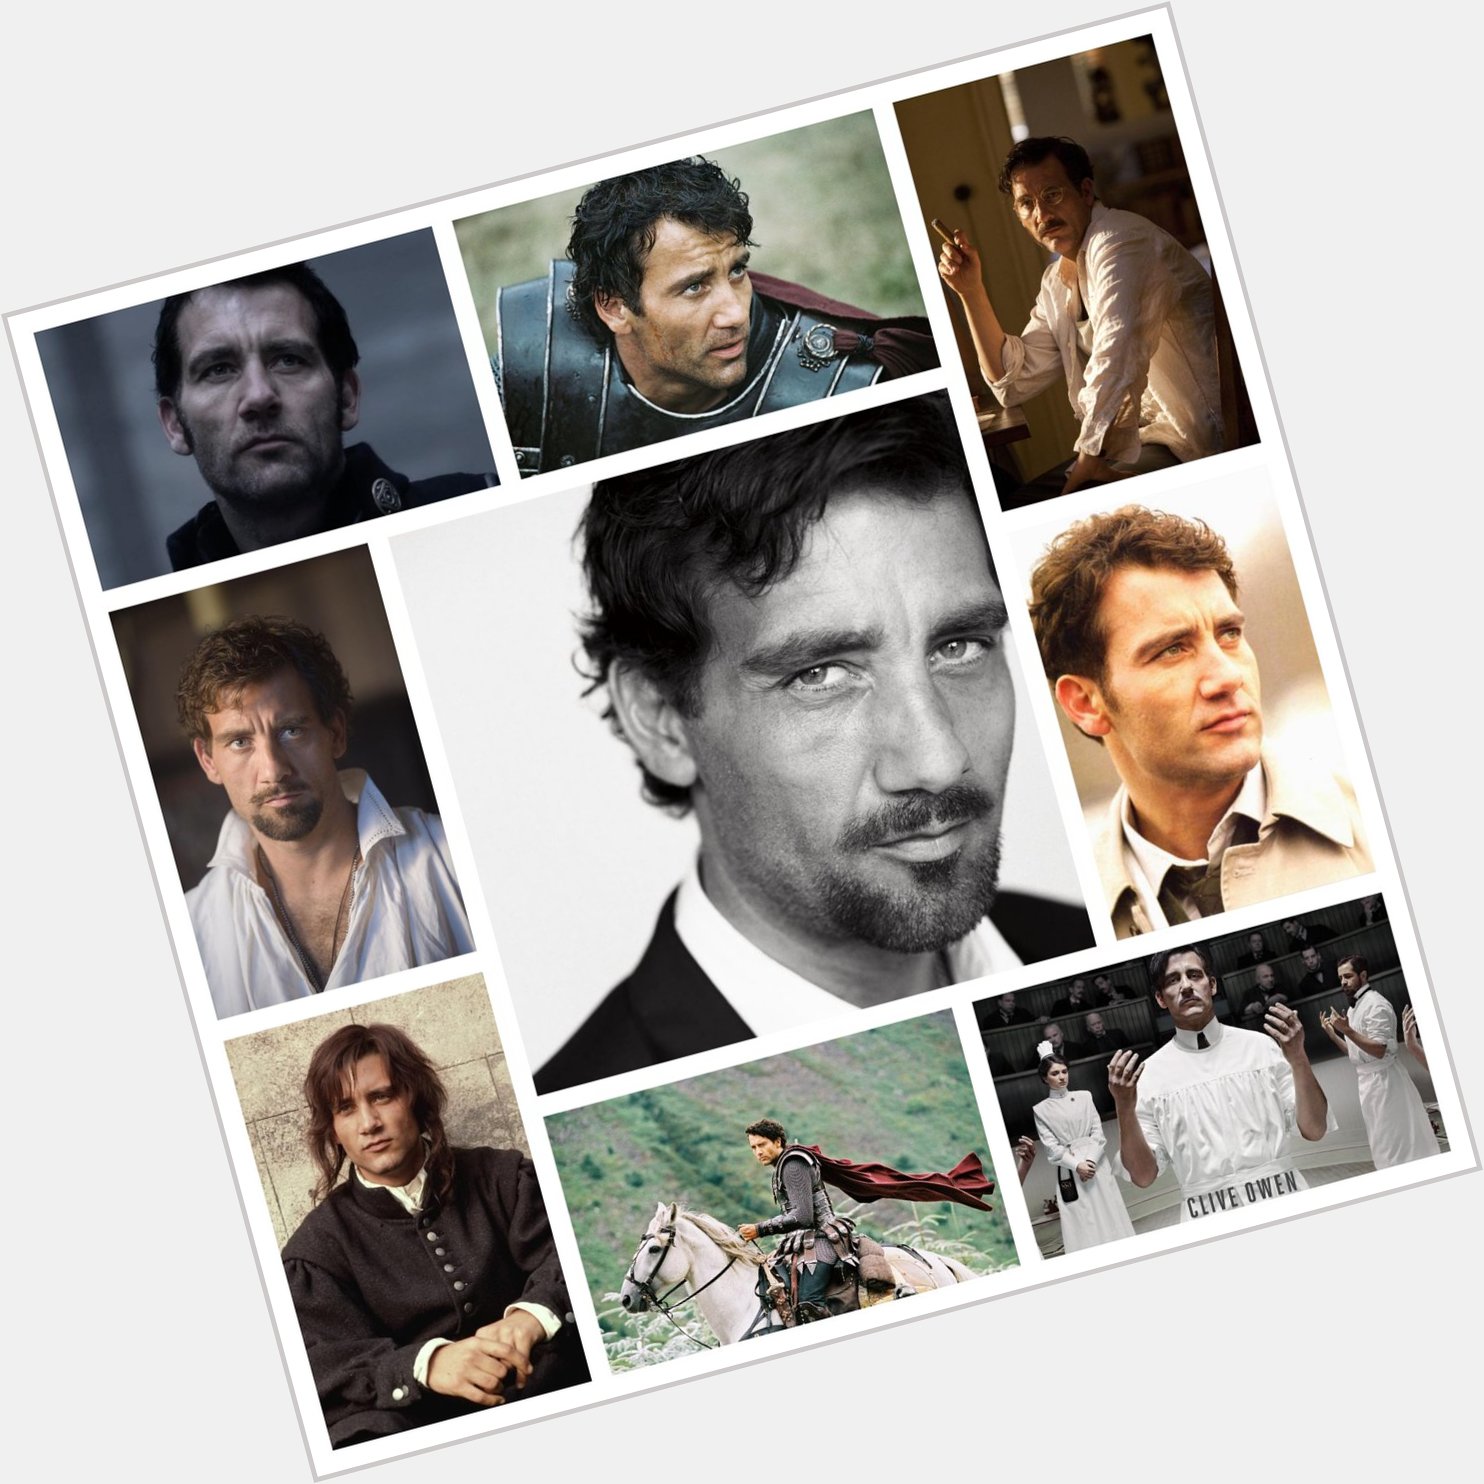  the charming and talented Clive Owen was born. Happy Birthday! 